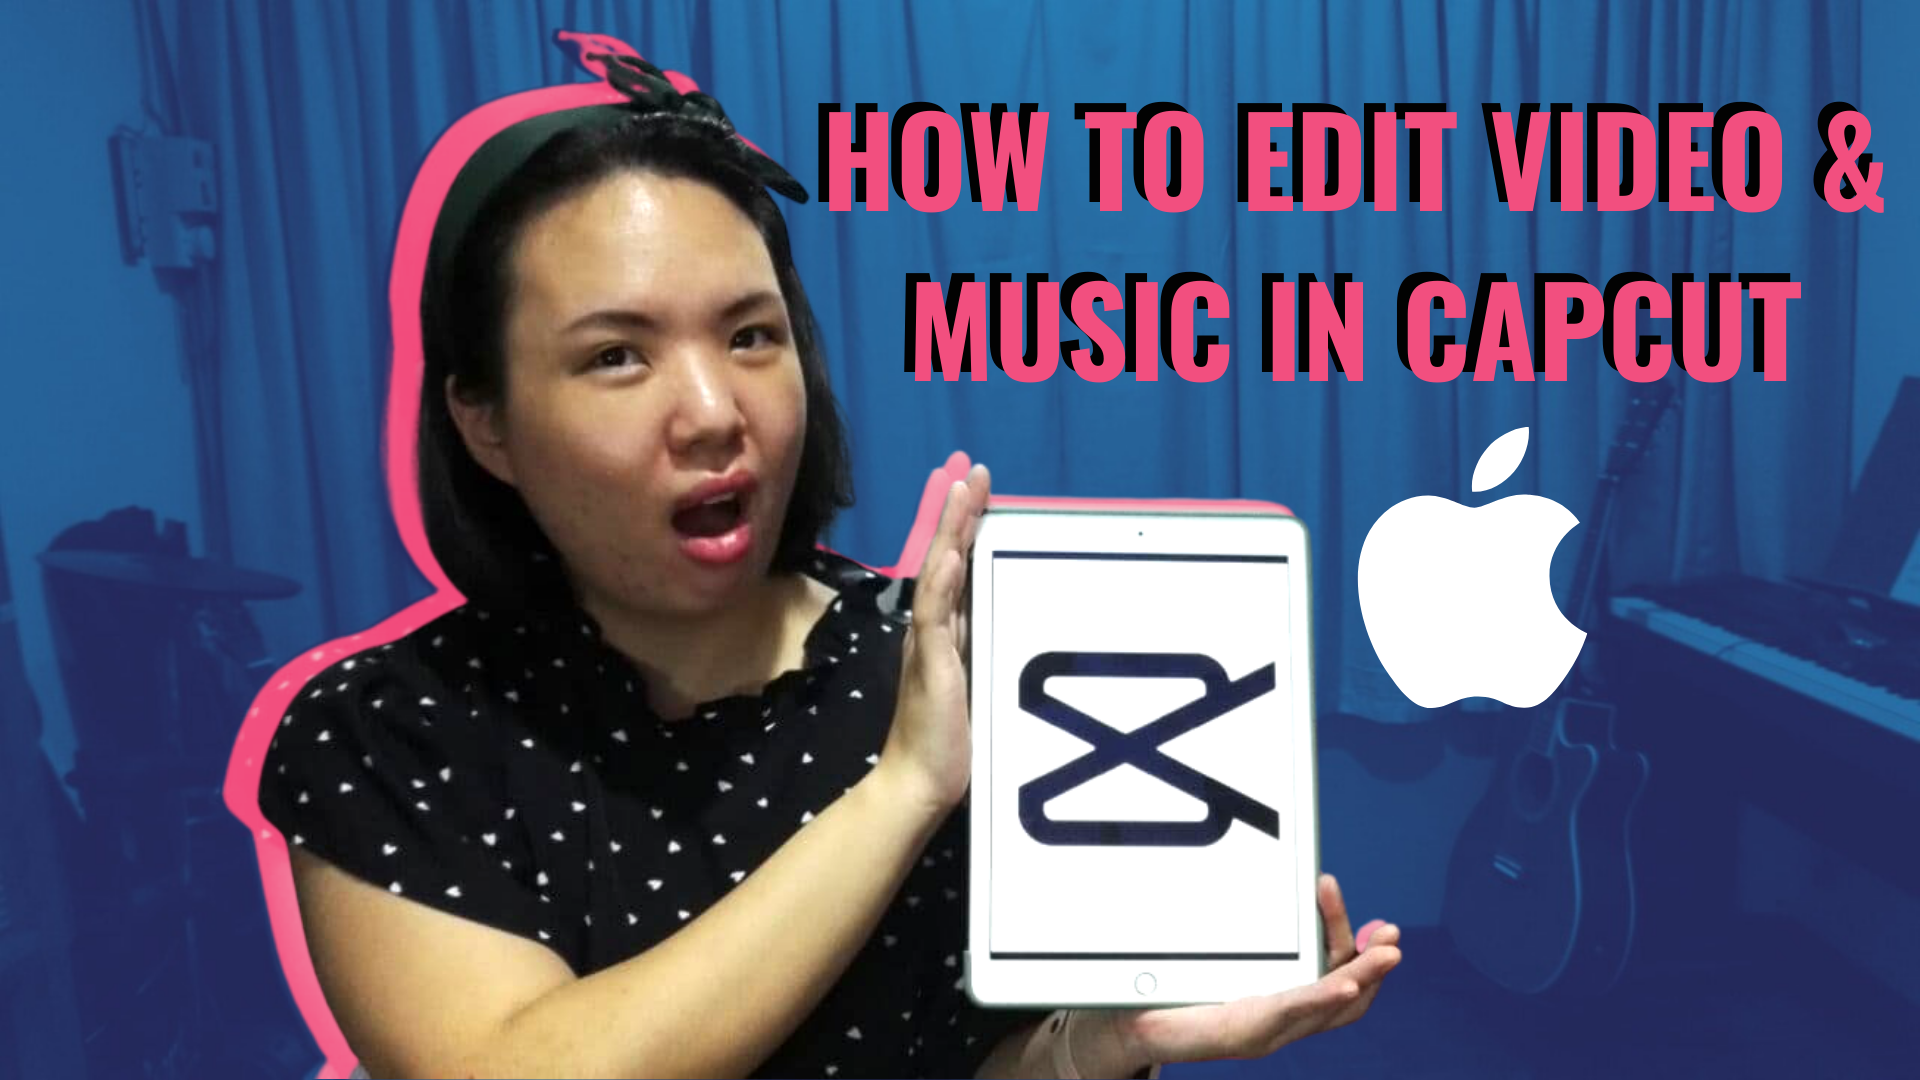 How To Edit Video & Music in Capcut App for iPhone/iPad